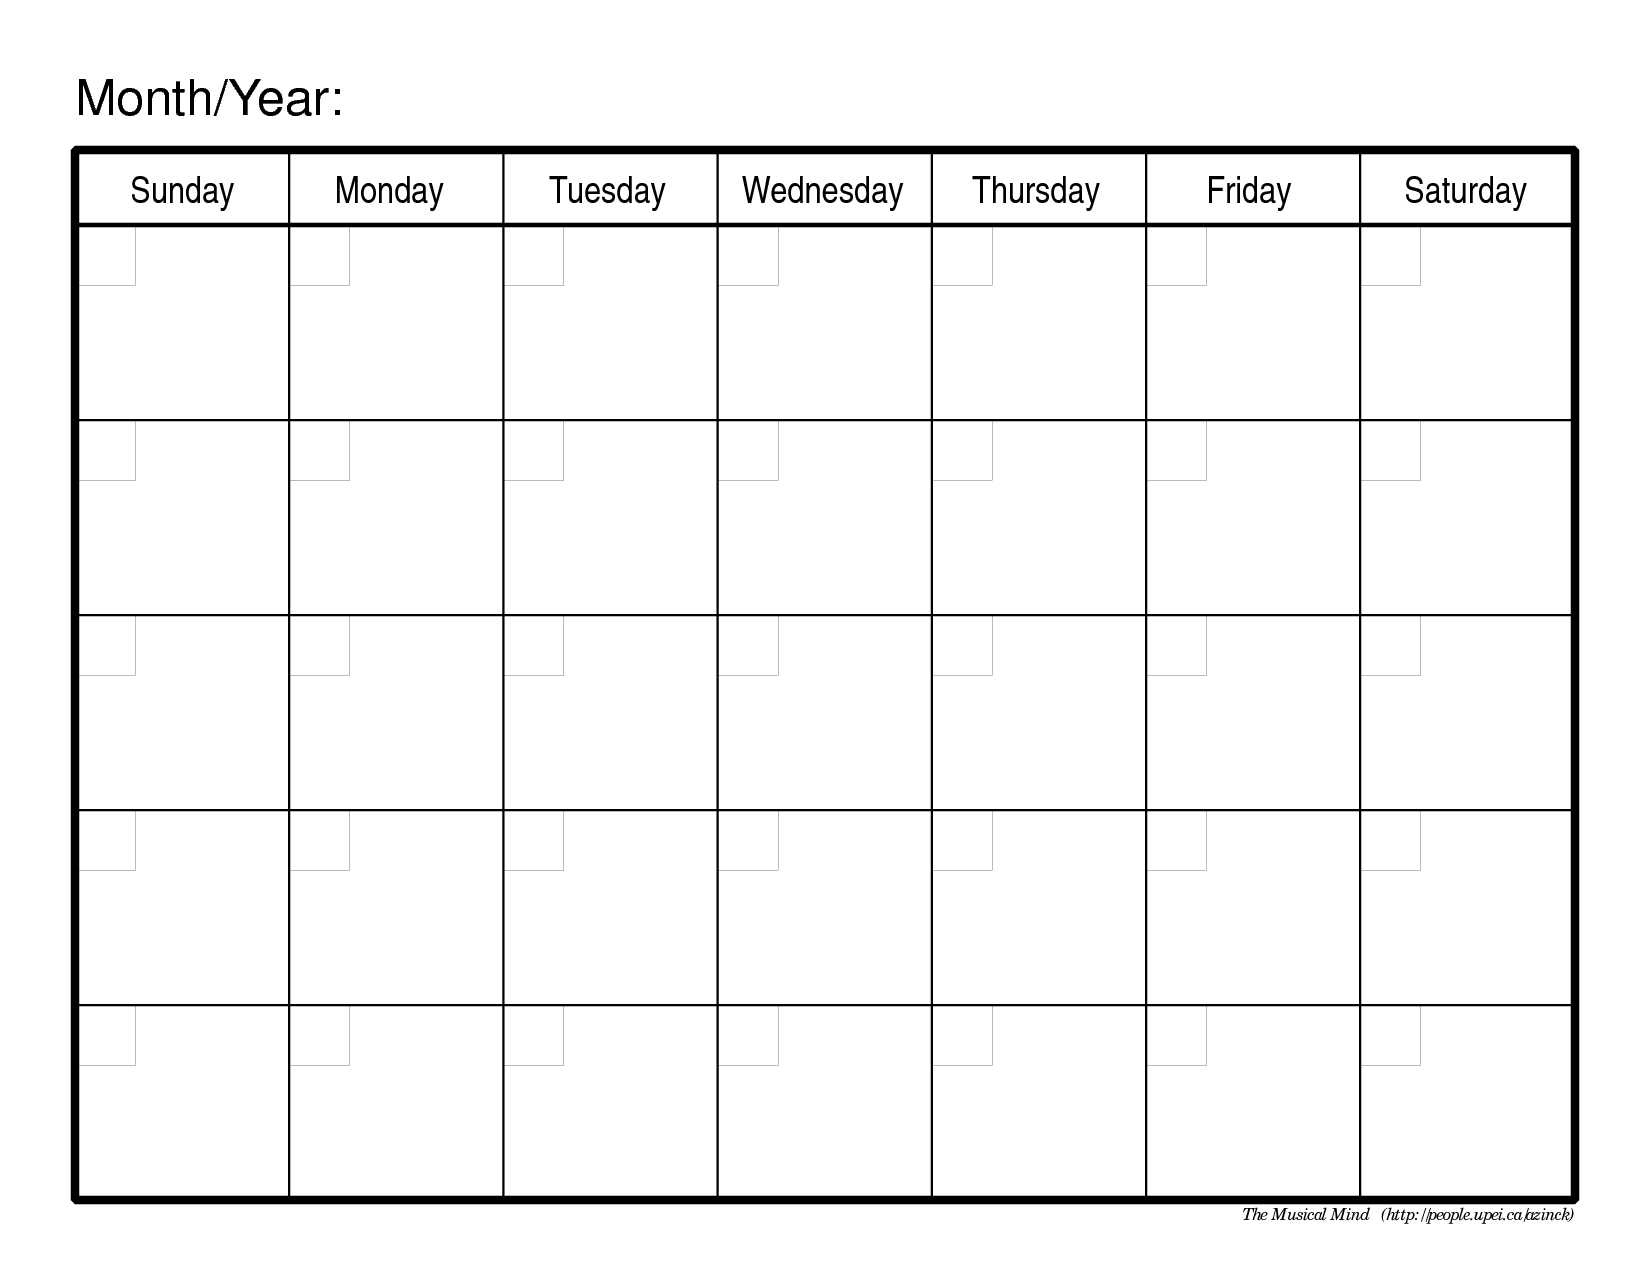 Monthly Schedule Calendar Template – Printable Schedule Template Regarding Blank One Month Calendar Template